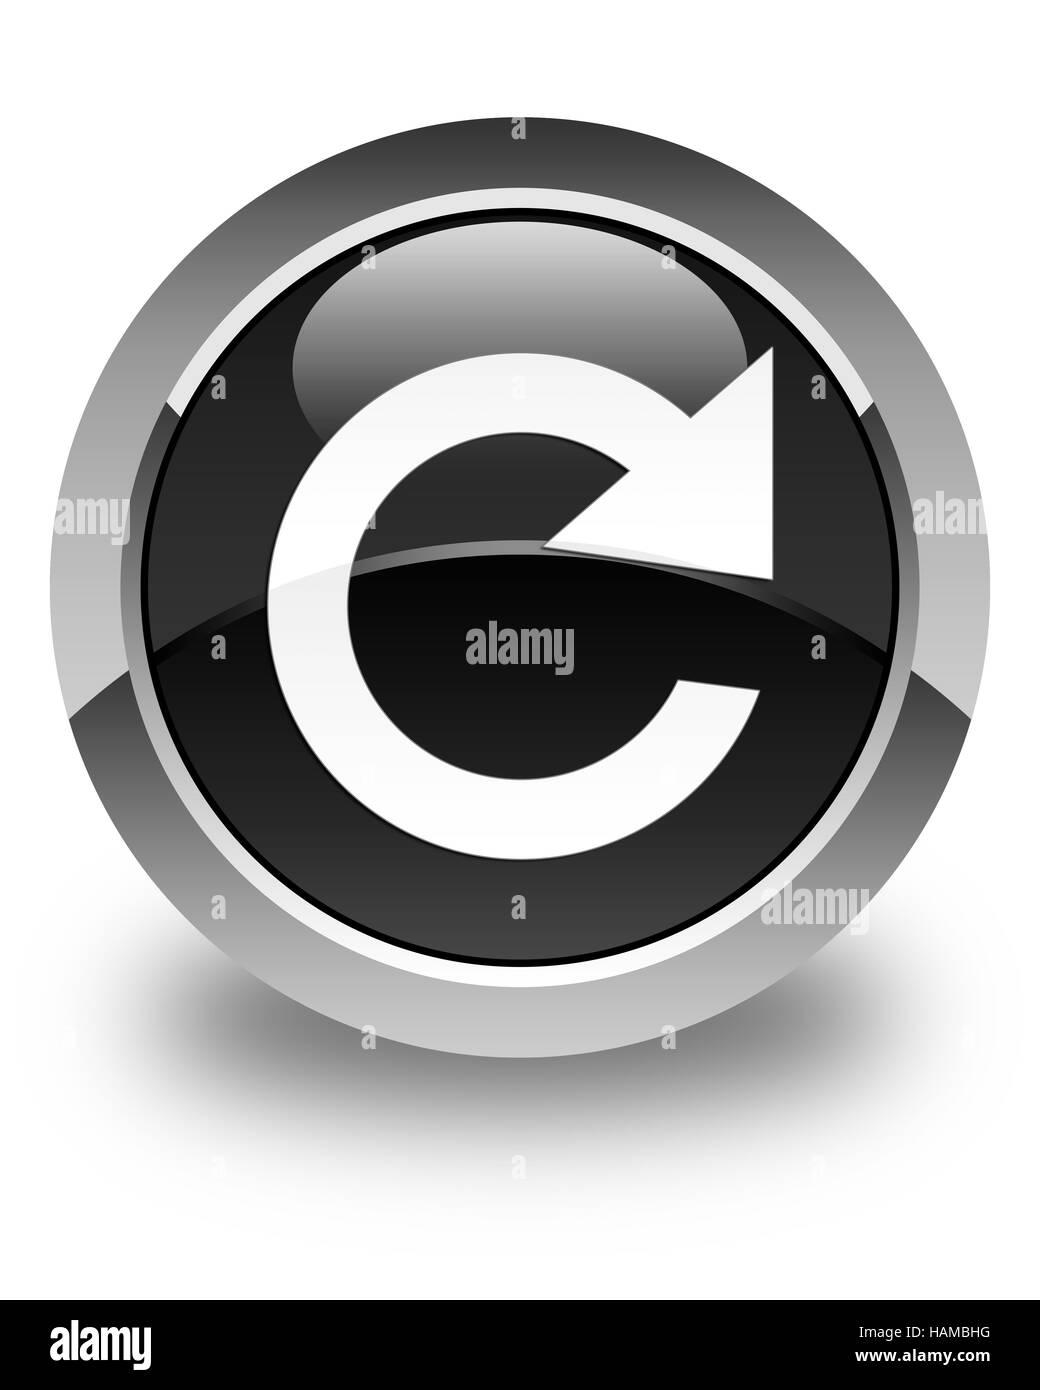 Reply rotate icon isolated on glossy black round button abstract illustration Stock Photo